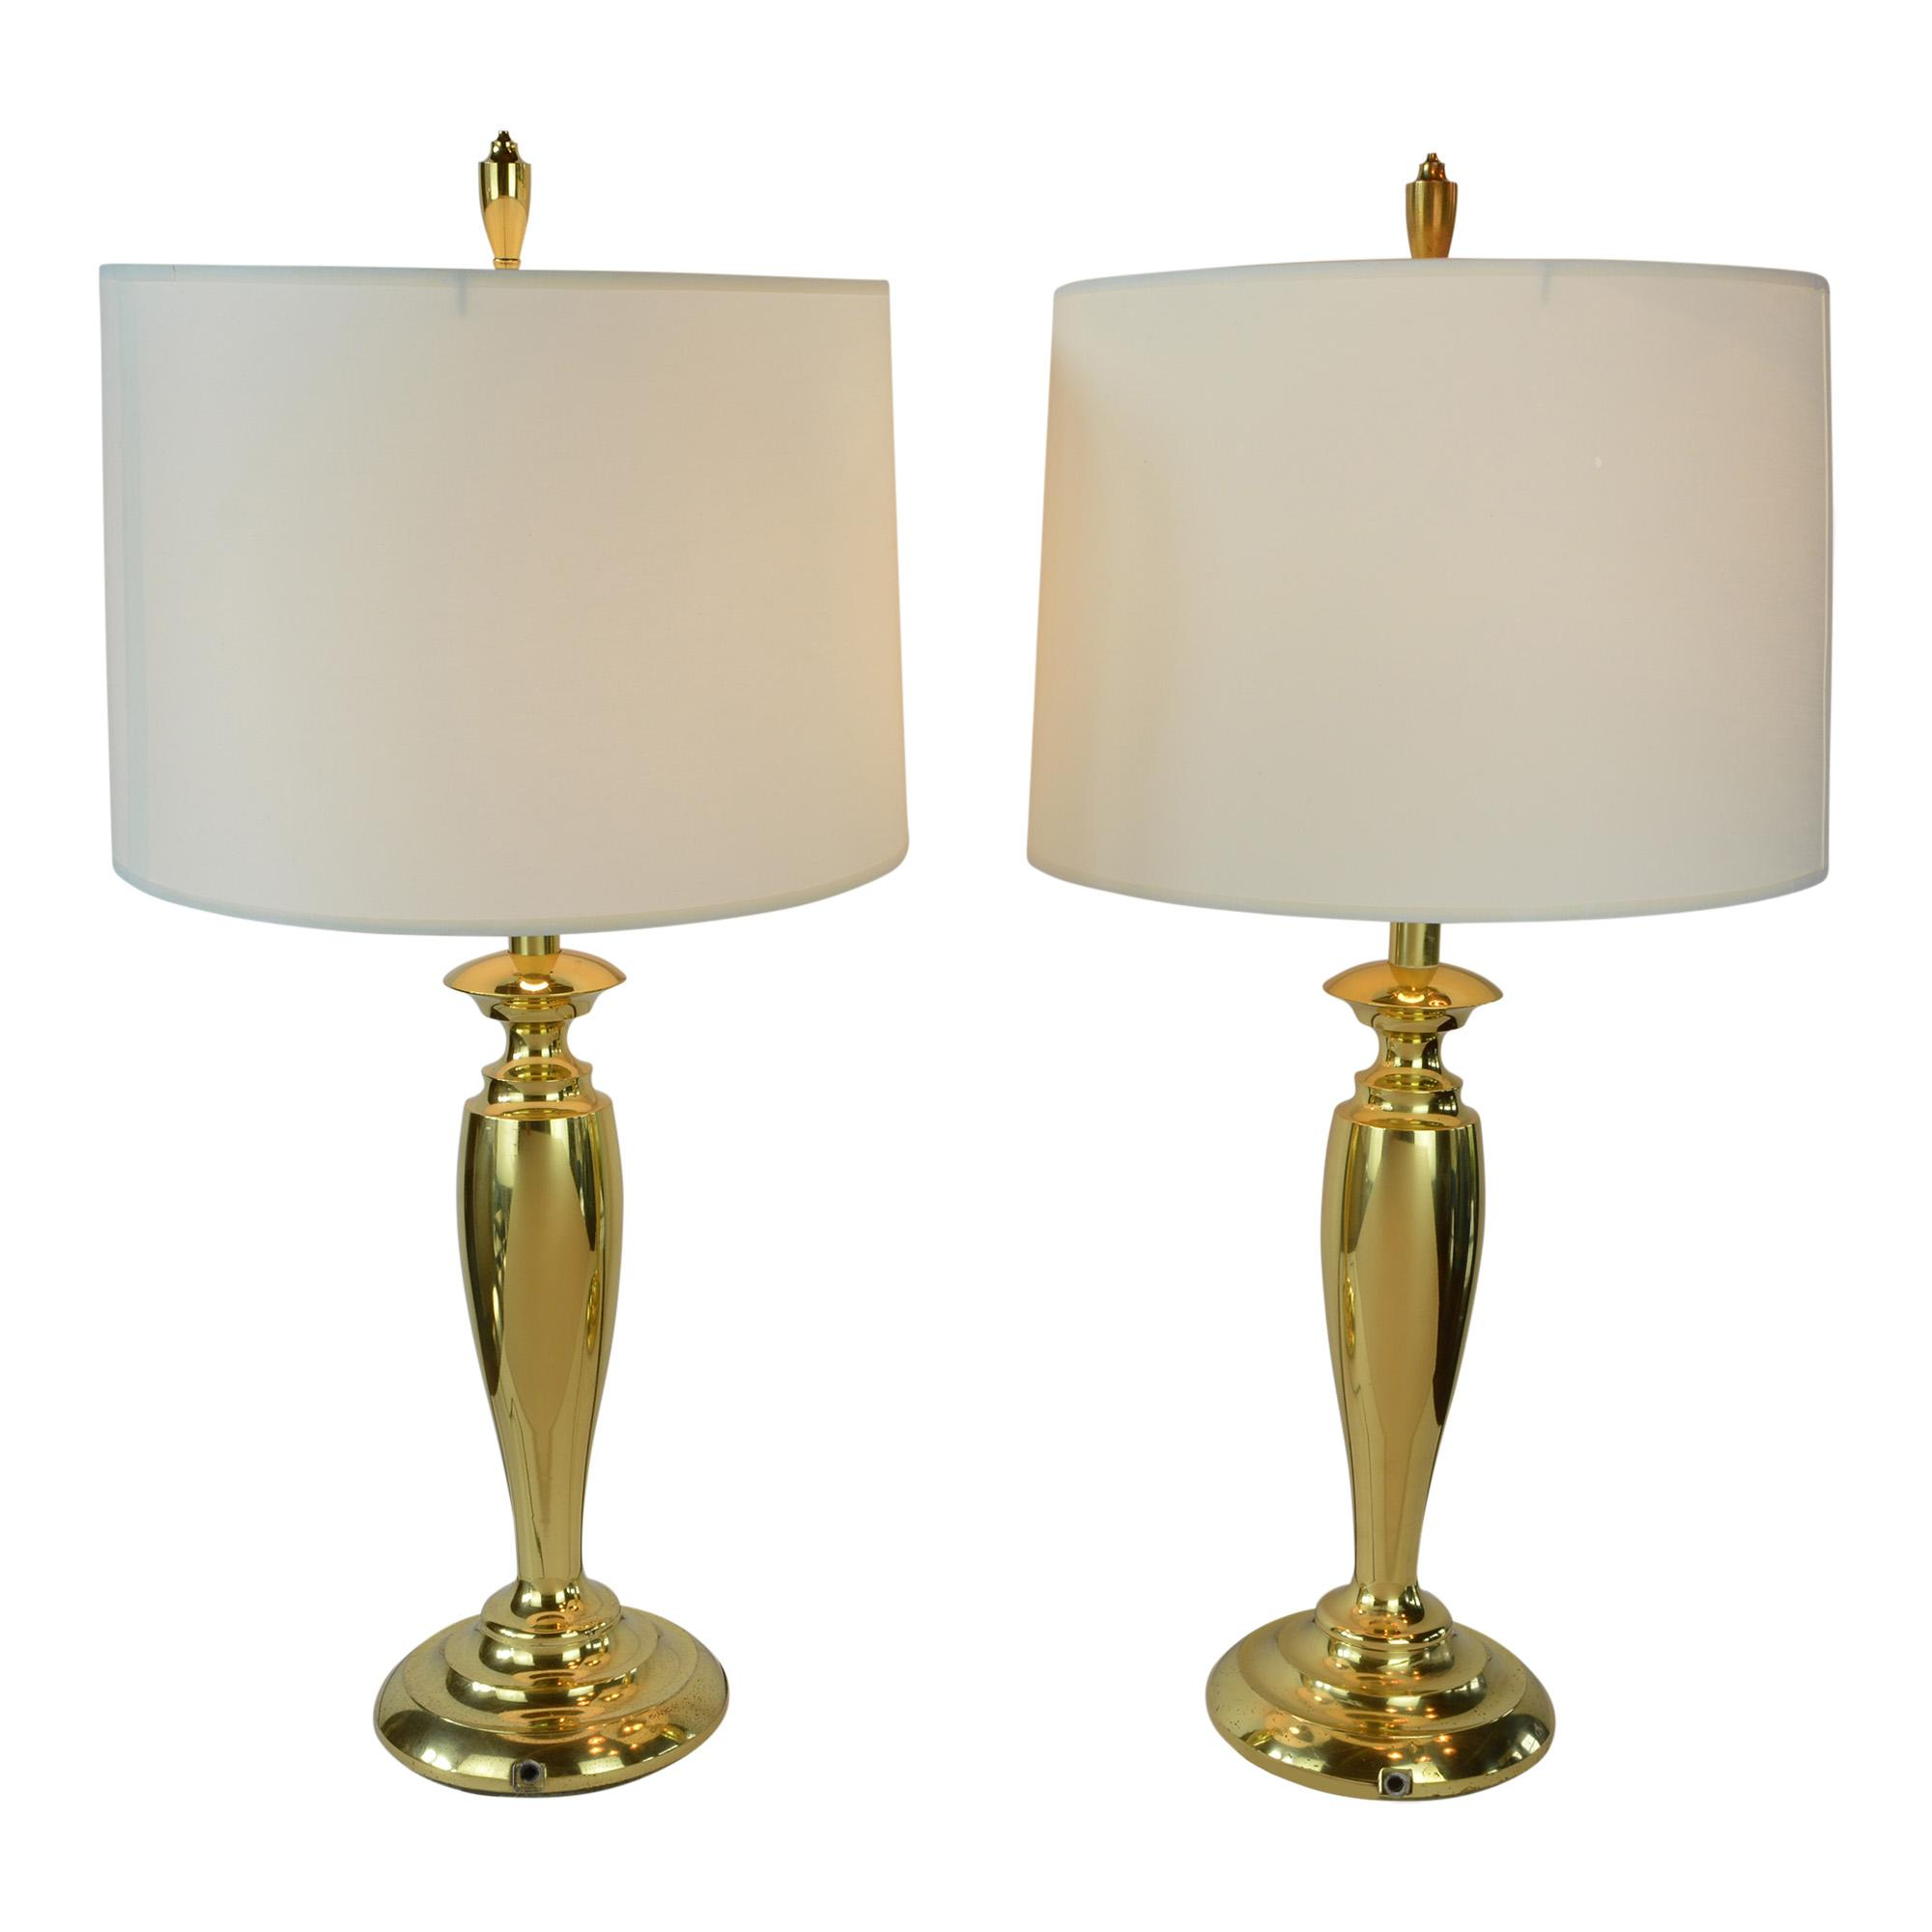 Lamps Lamp Shade Styles Halogen Torchiere Lamp Uno Lamp with regard to dimensions 2000 X 2000